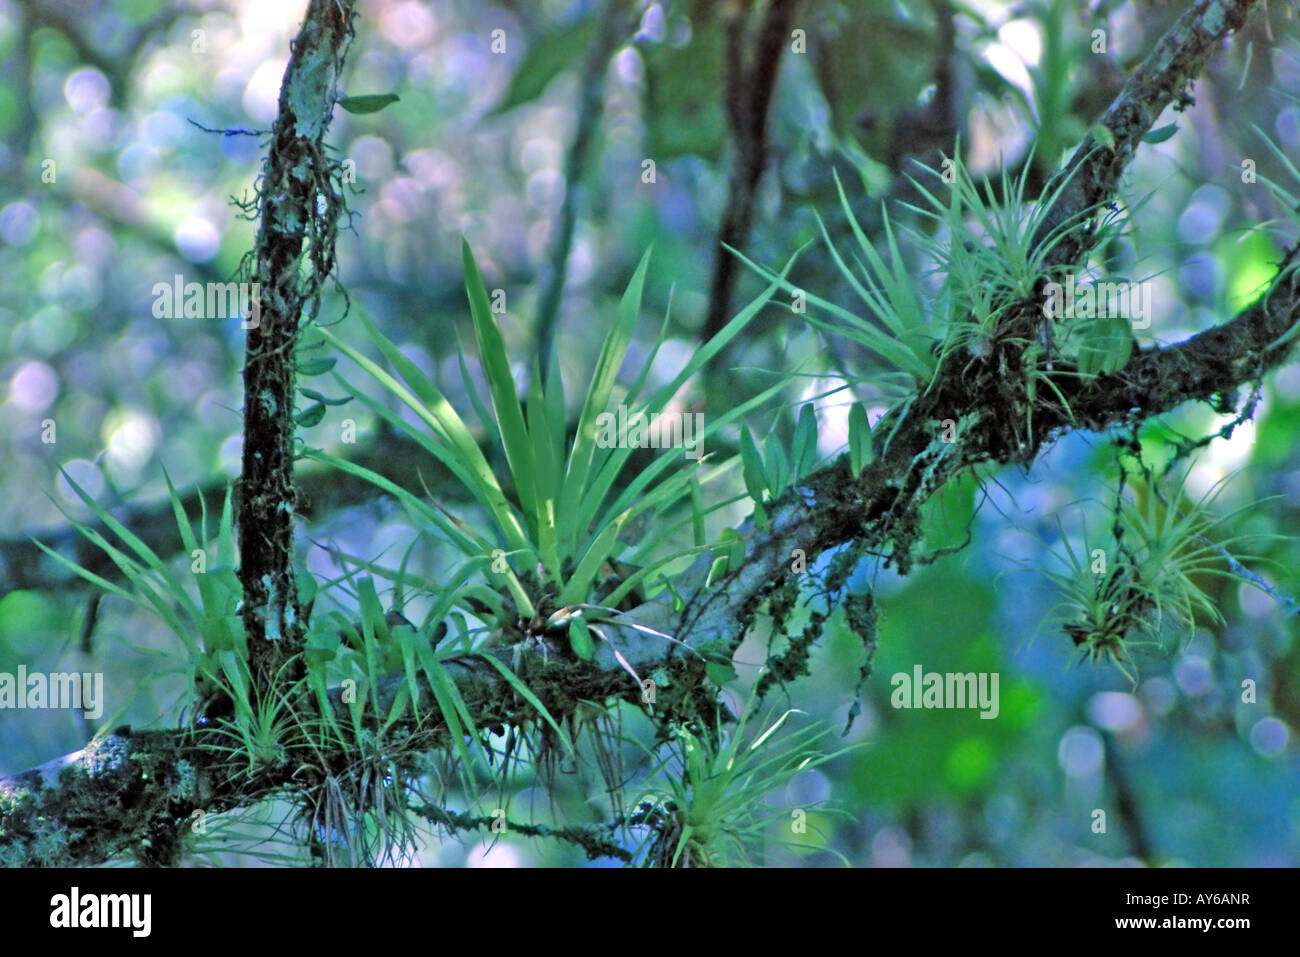 epiphytes Bromeliads Costa Rican rain forest Stock Photo